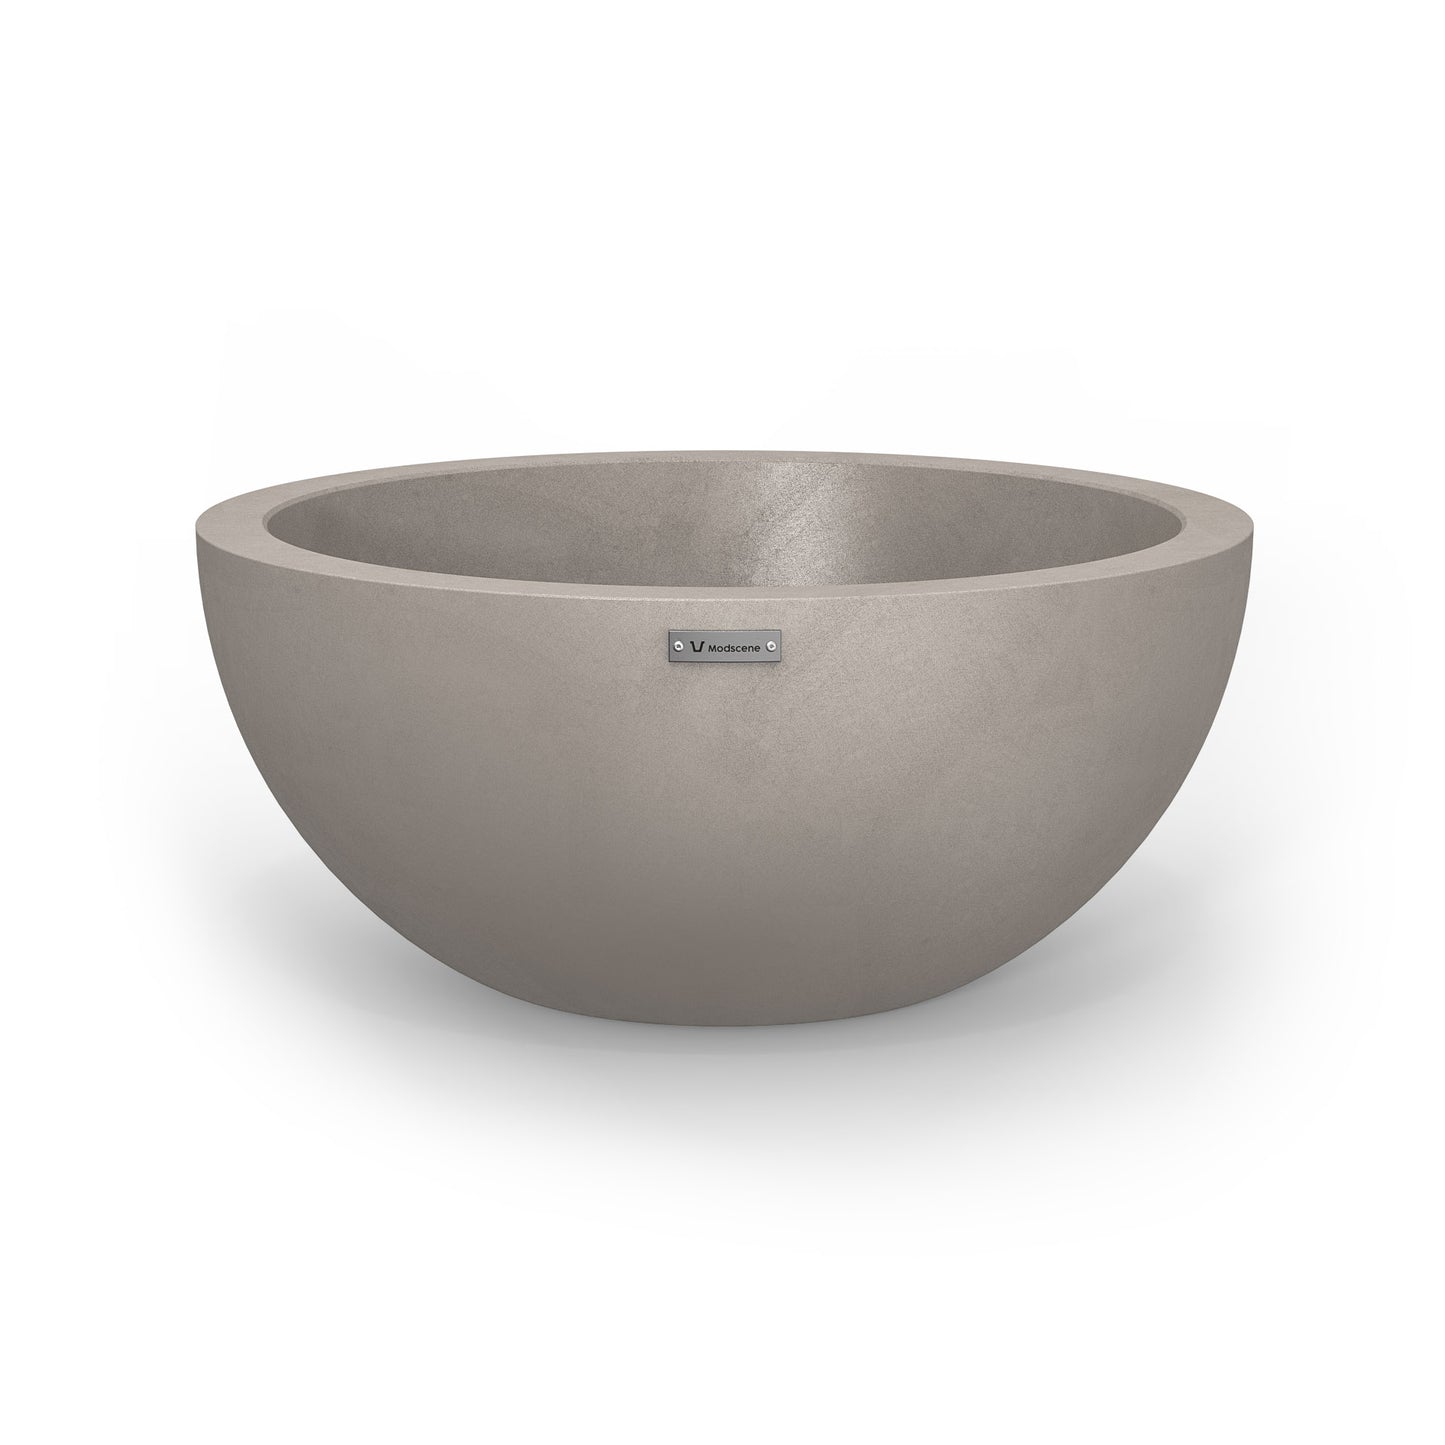 A medium Modscene planter bowl with a concrete look.